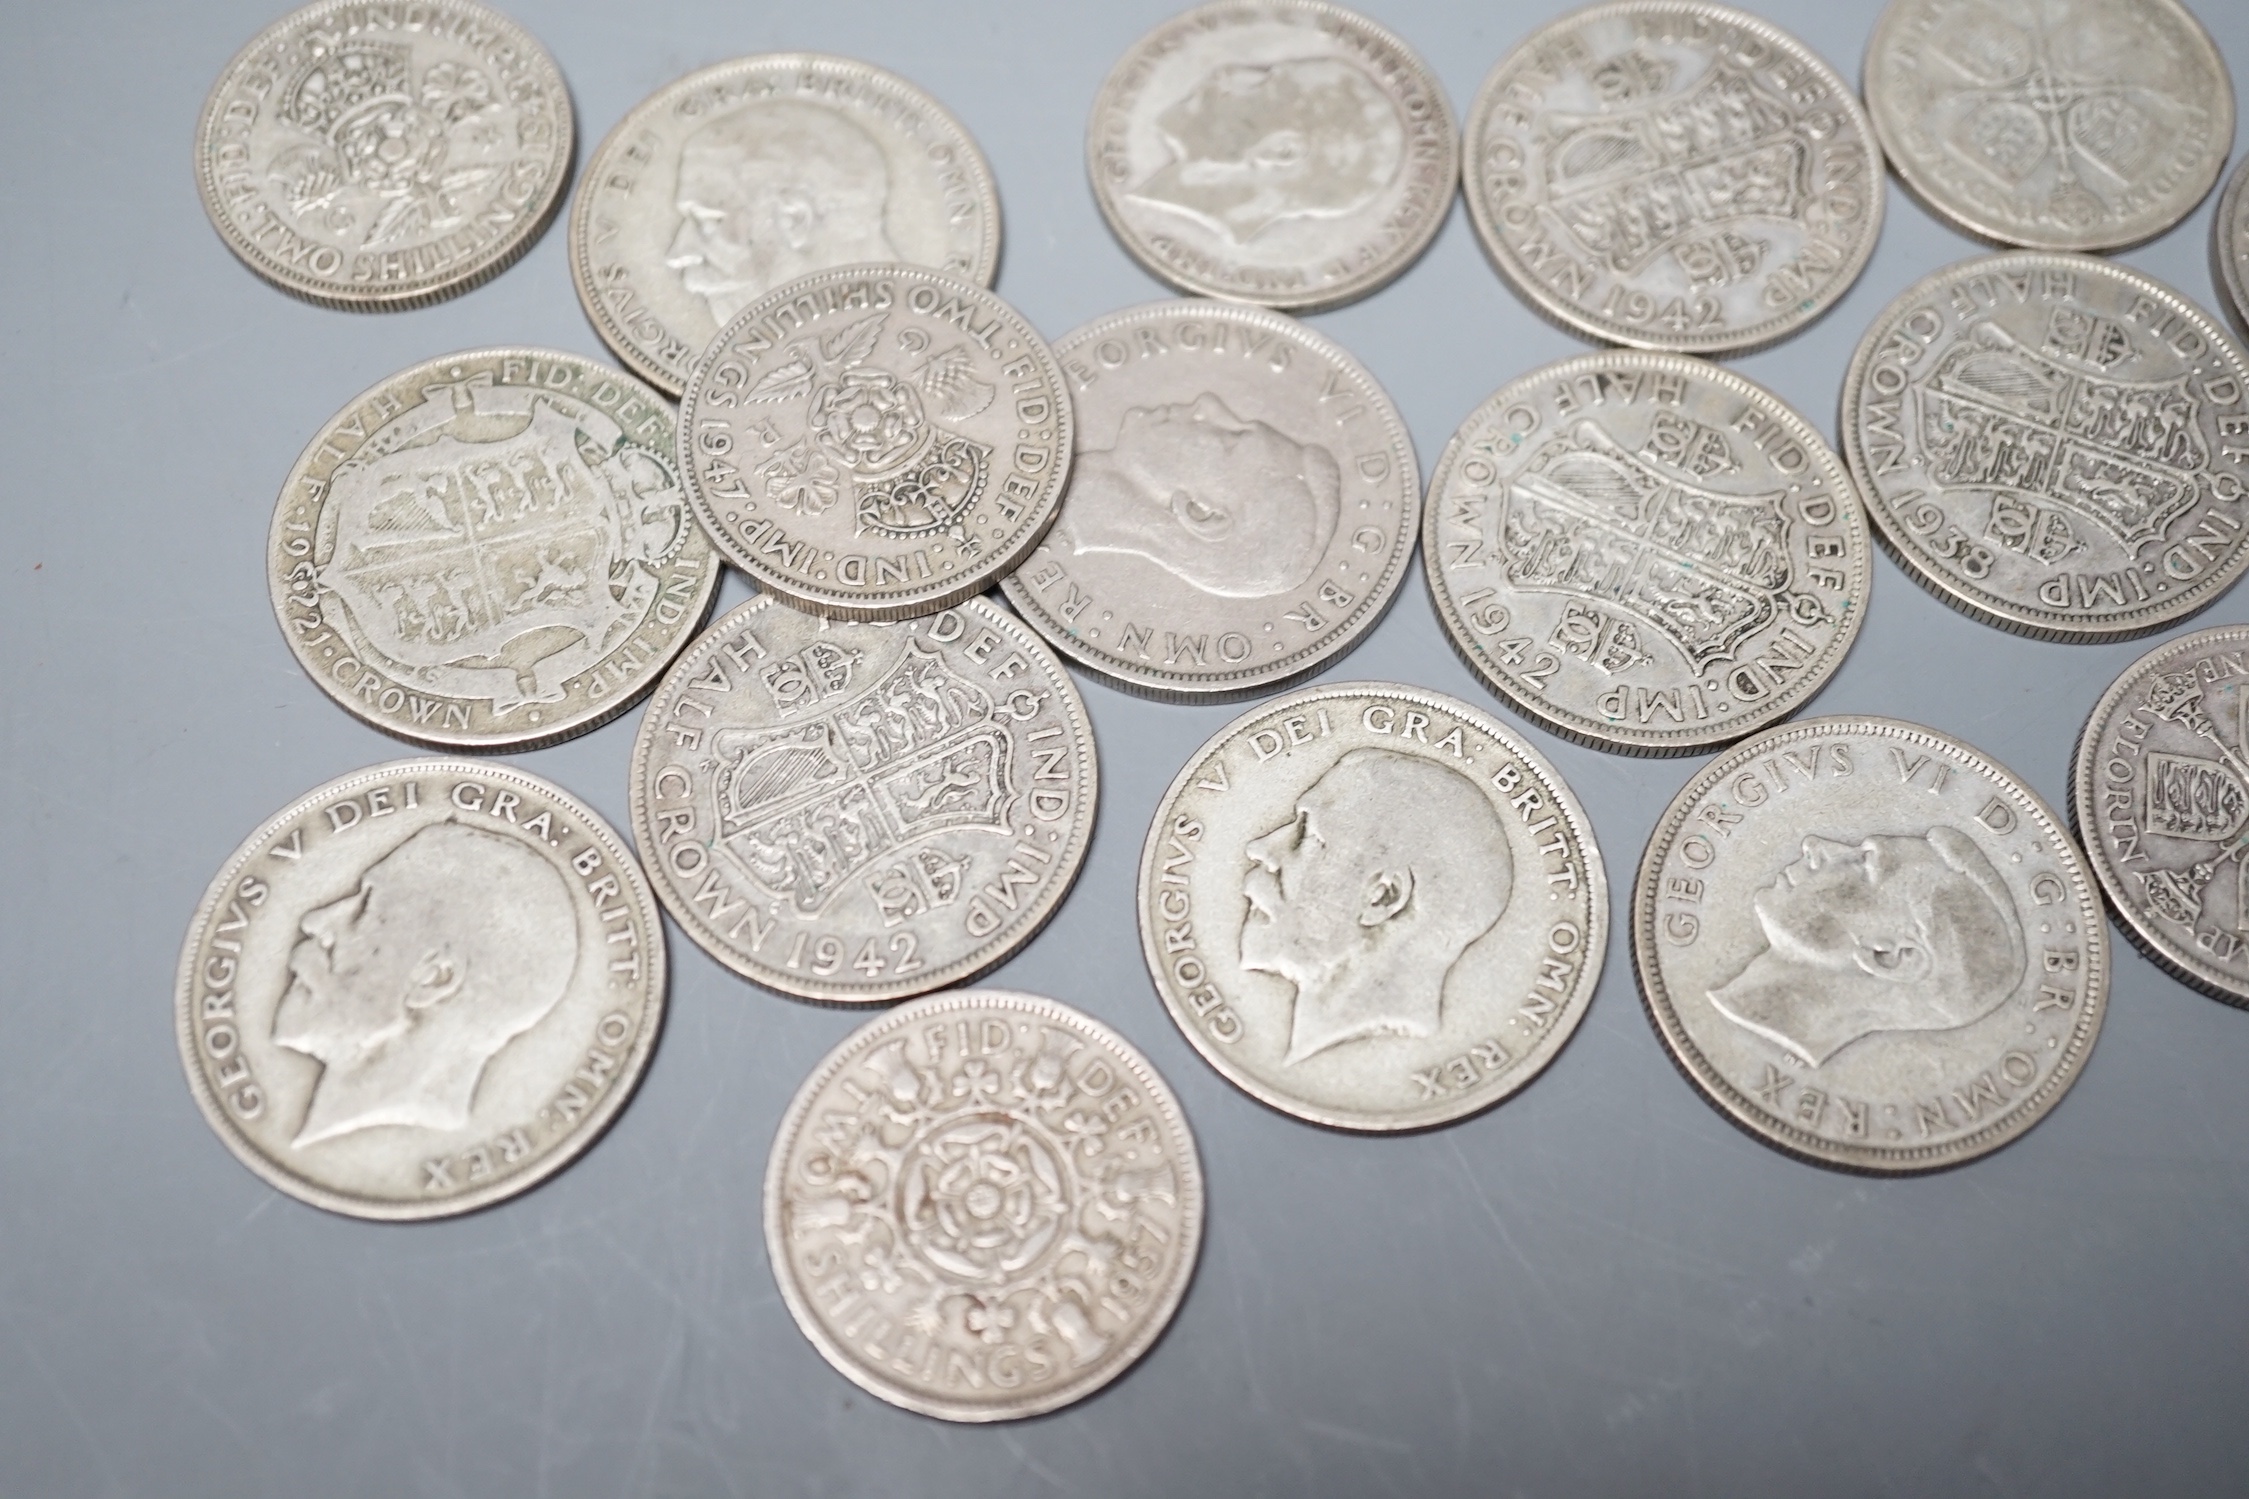 A 1976 French 50 Francs, and a collection of George V to QEII UK florins, shillings and threepence coins